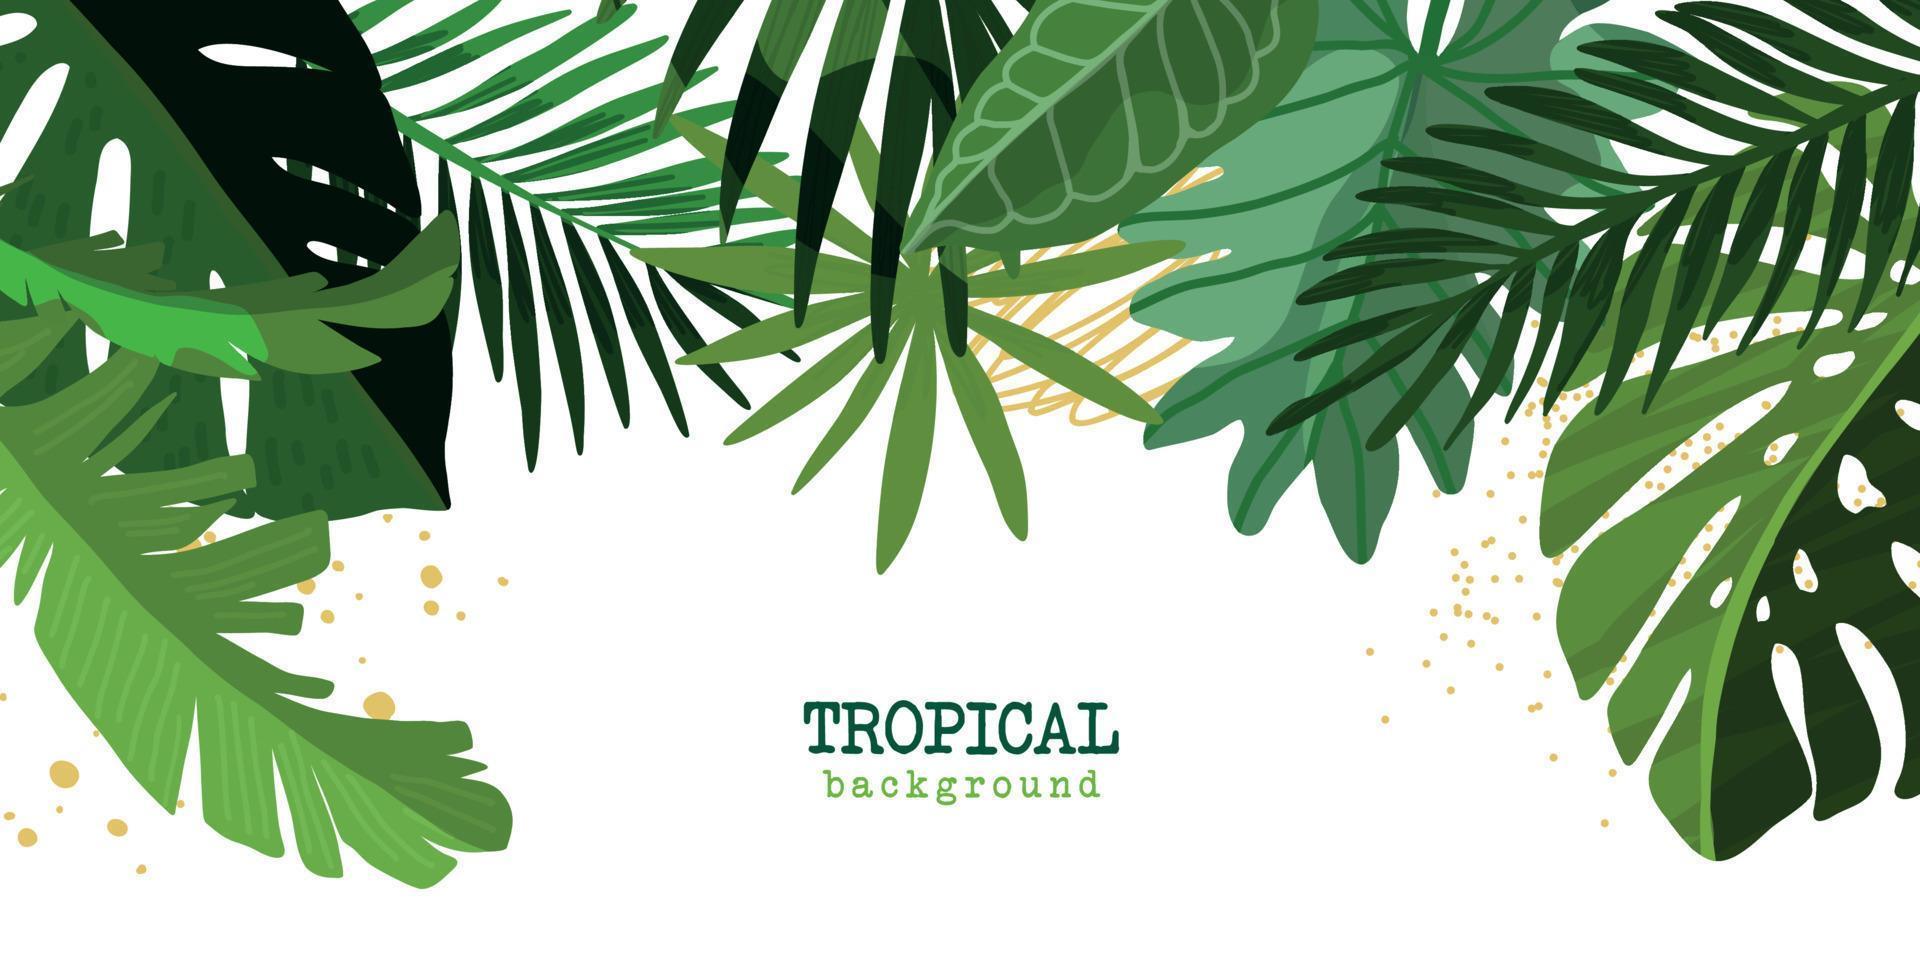 Tropical floral background, green monstera and palm leaves vector